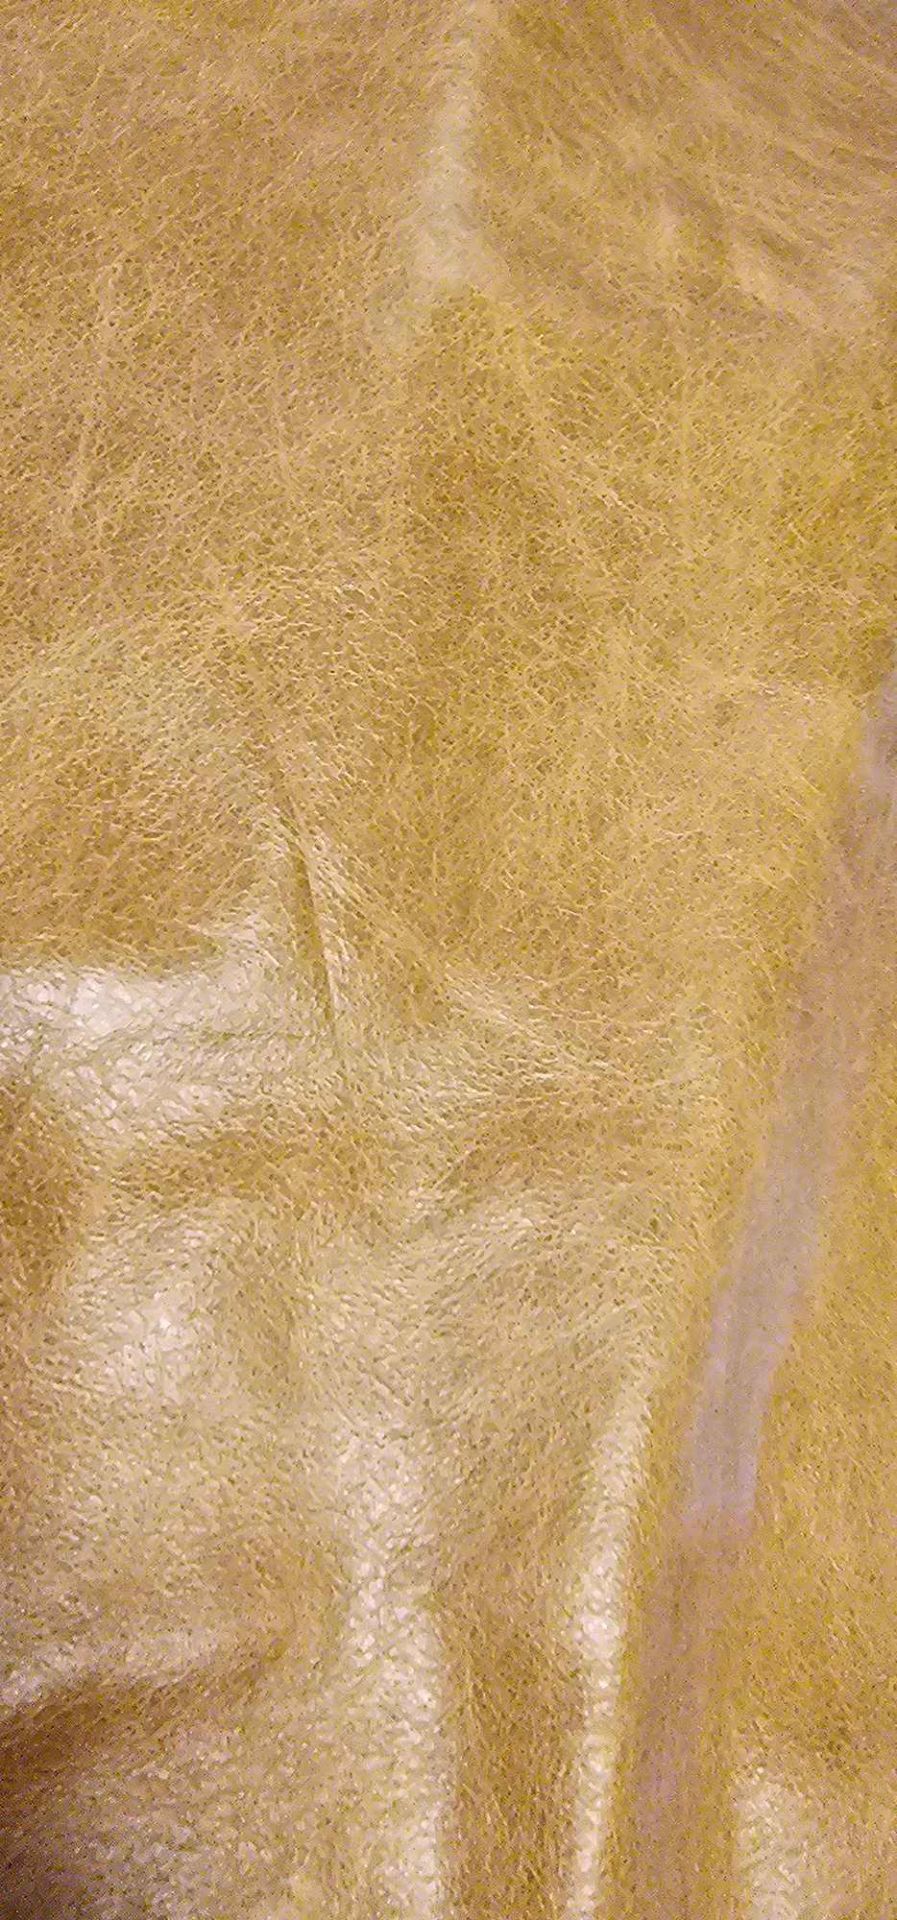 Yarwood Leather Cow Hide Oregon Ash Approx. 2.31m2 - Image 2 of 7